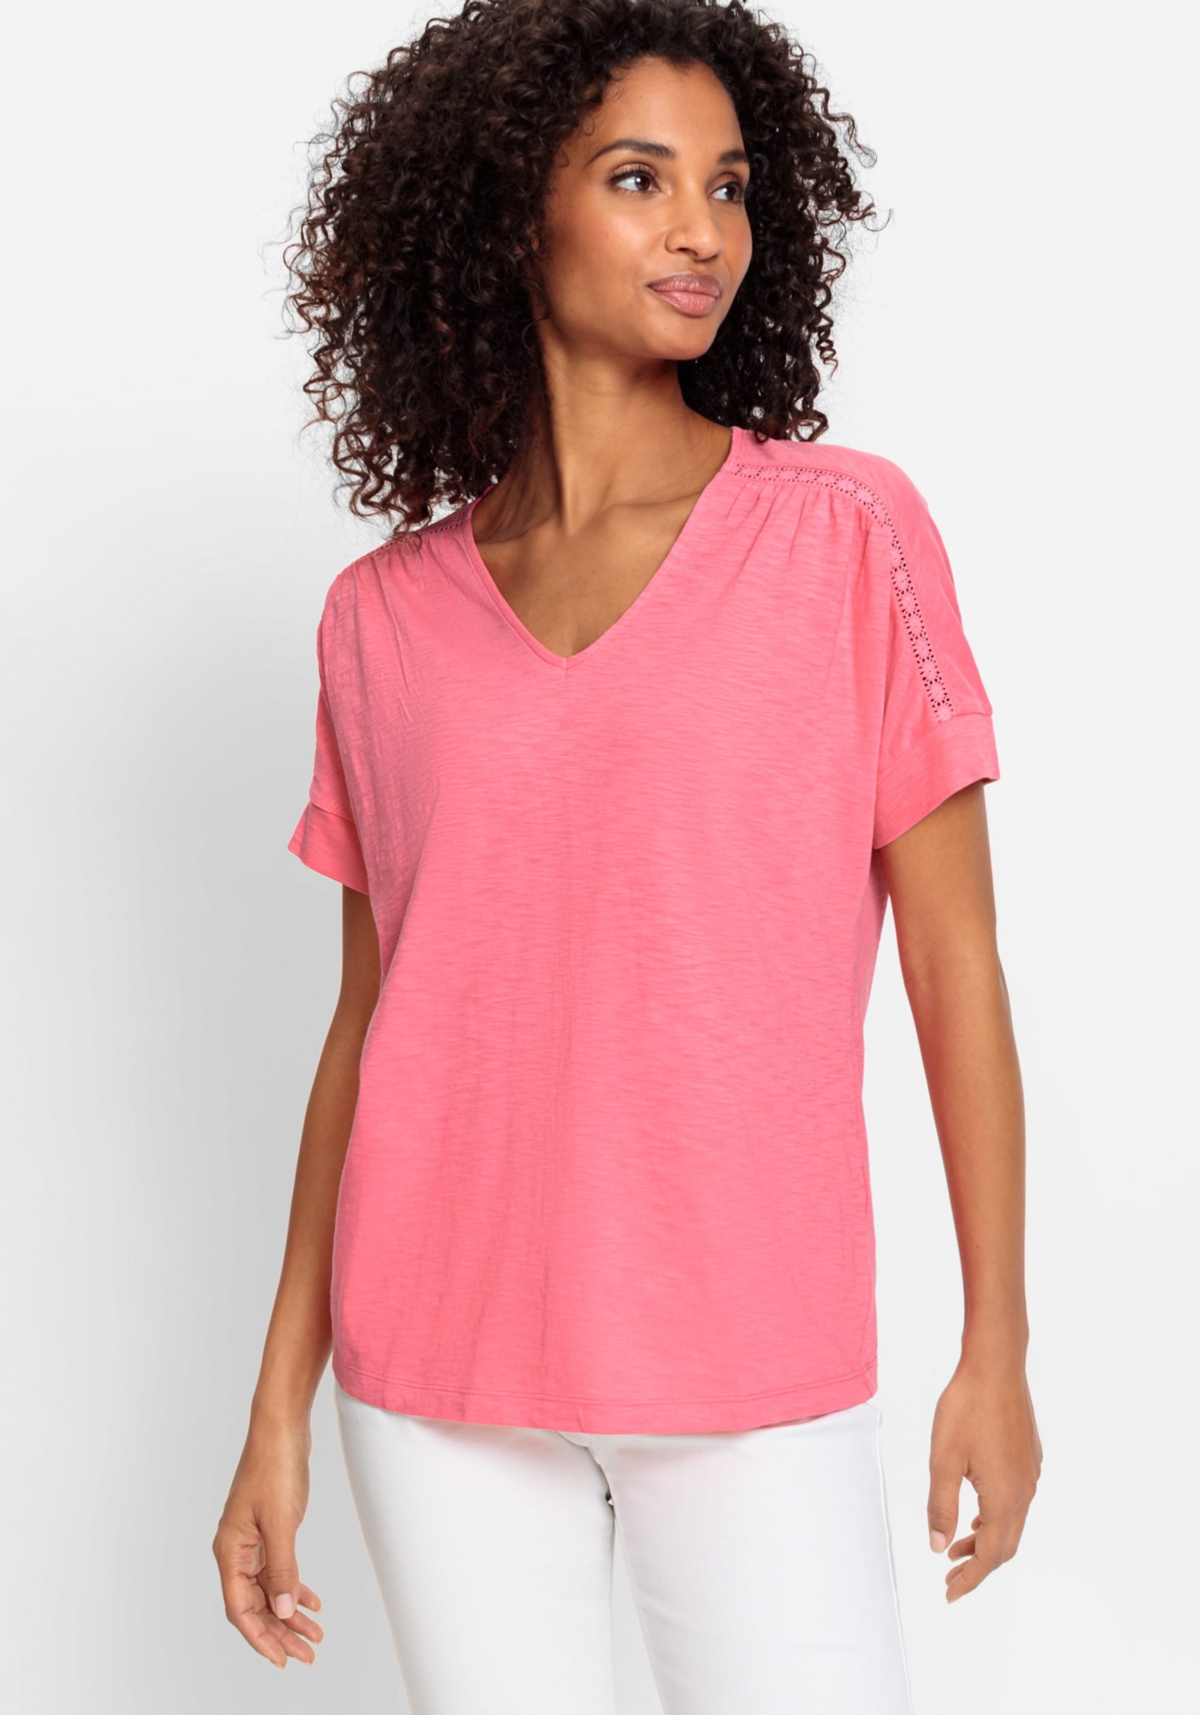 Women's 100% Cotton Short Sleeve Solid Tee with Embroidered Trim - Beach rose